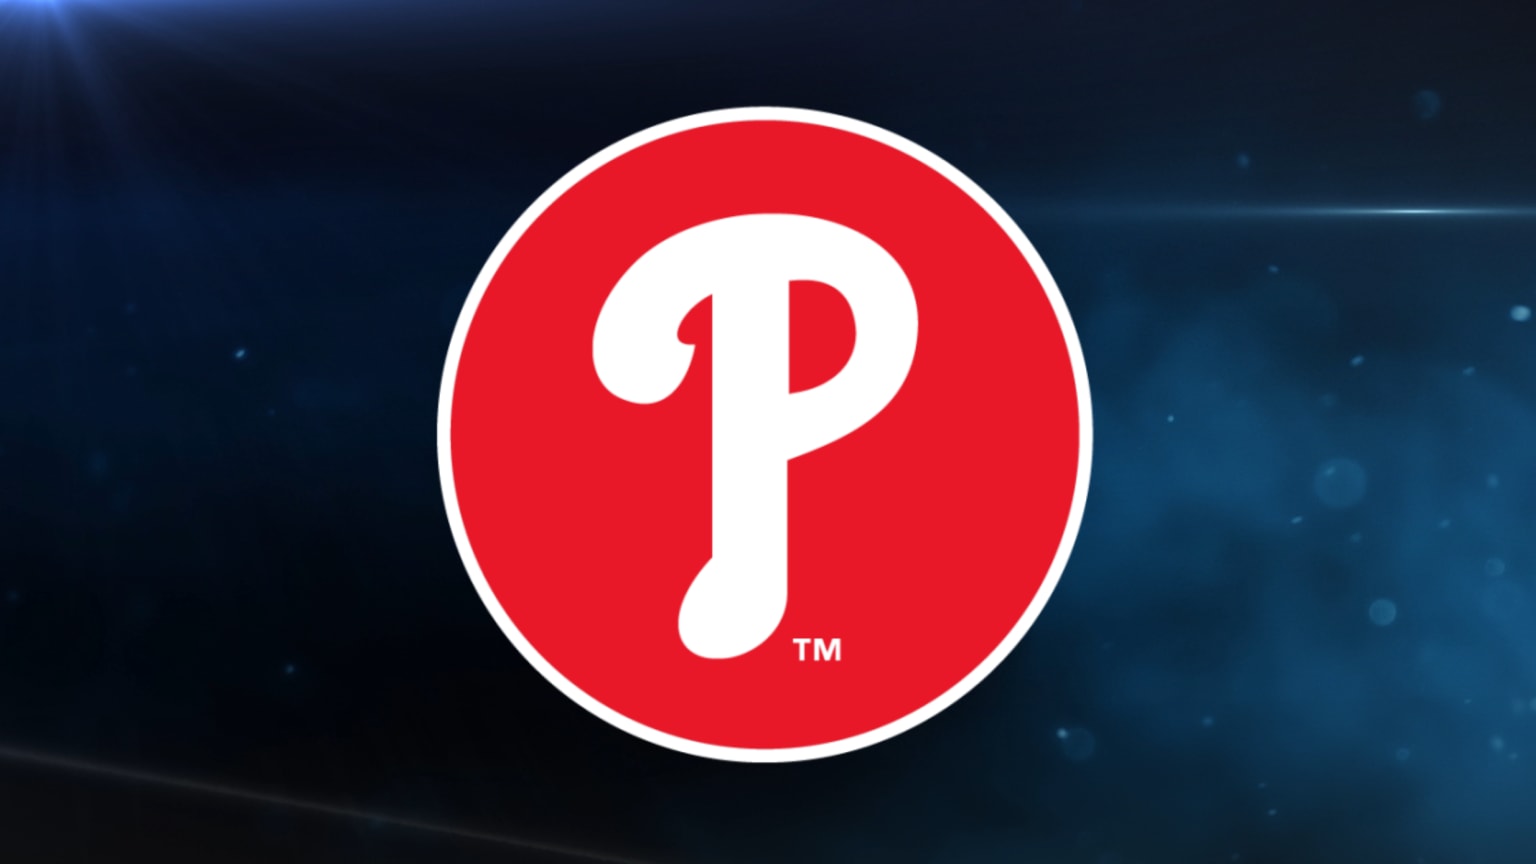 Phillies Toyota Alumni Weekend Lineup Announced: Legends Return August 1-4  for Fan Events